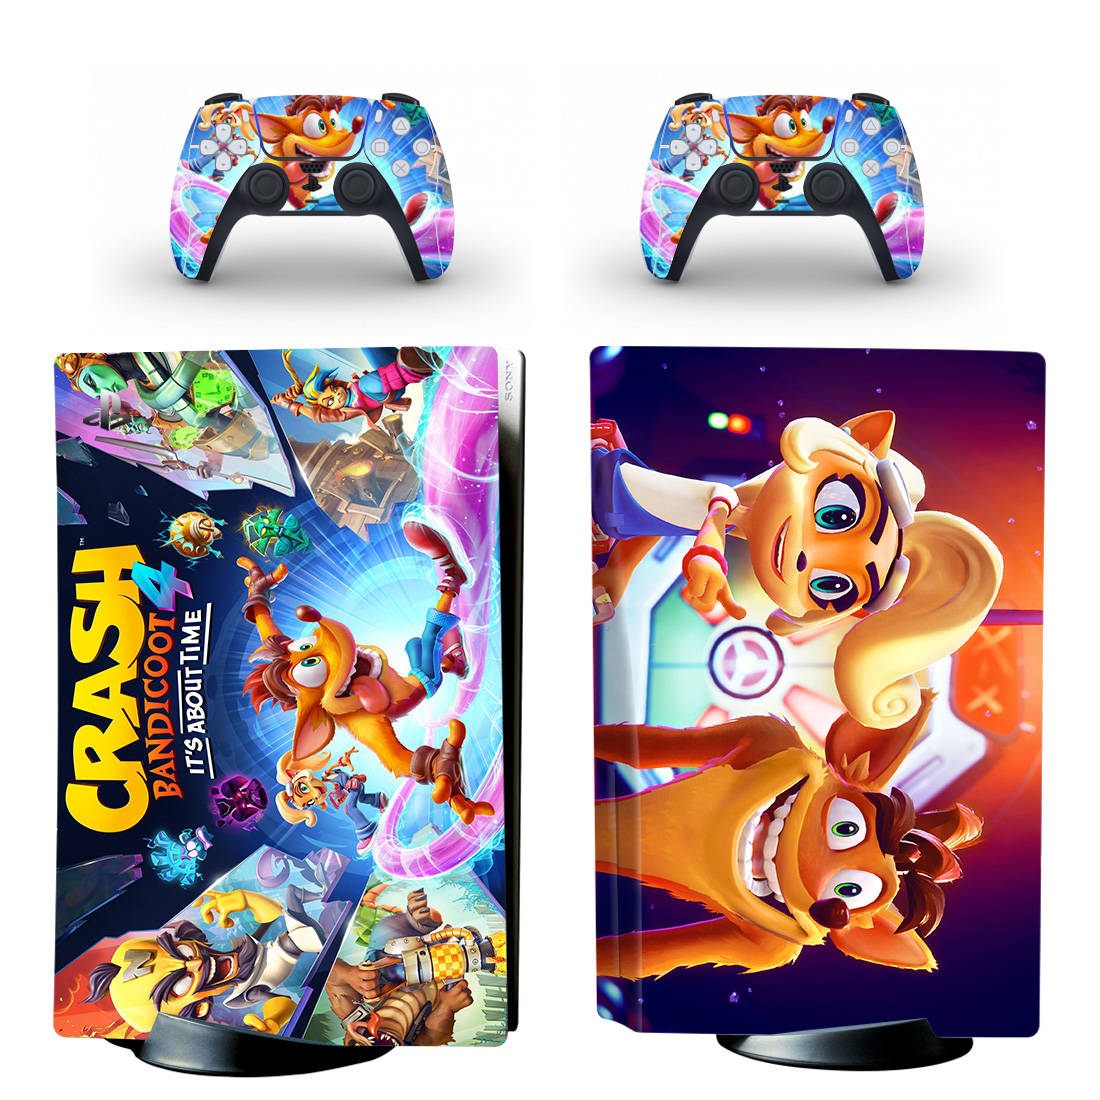 Crash Bandicoot 4: It's About Time Console Skin Sticker And Controllers